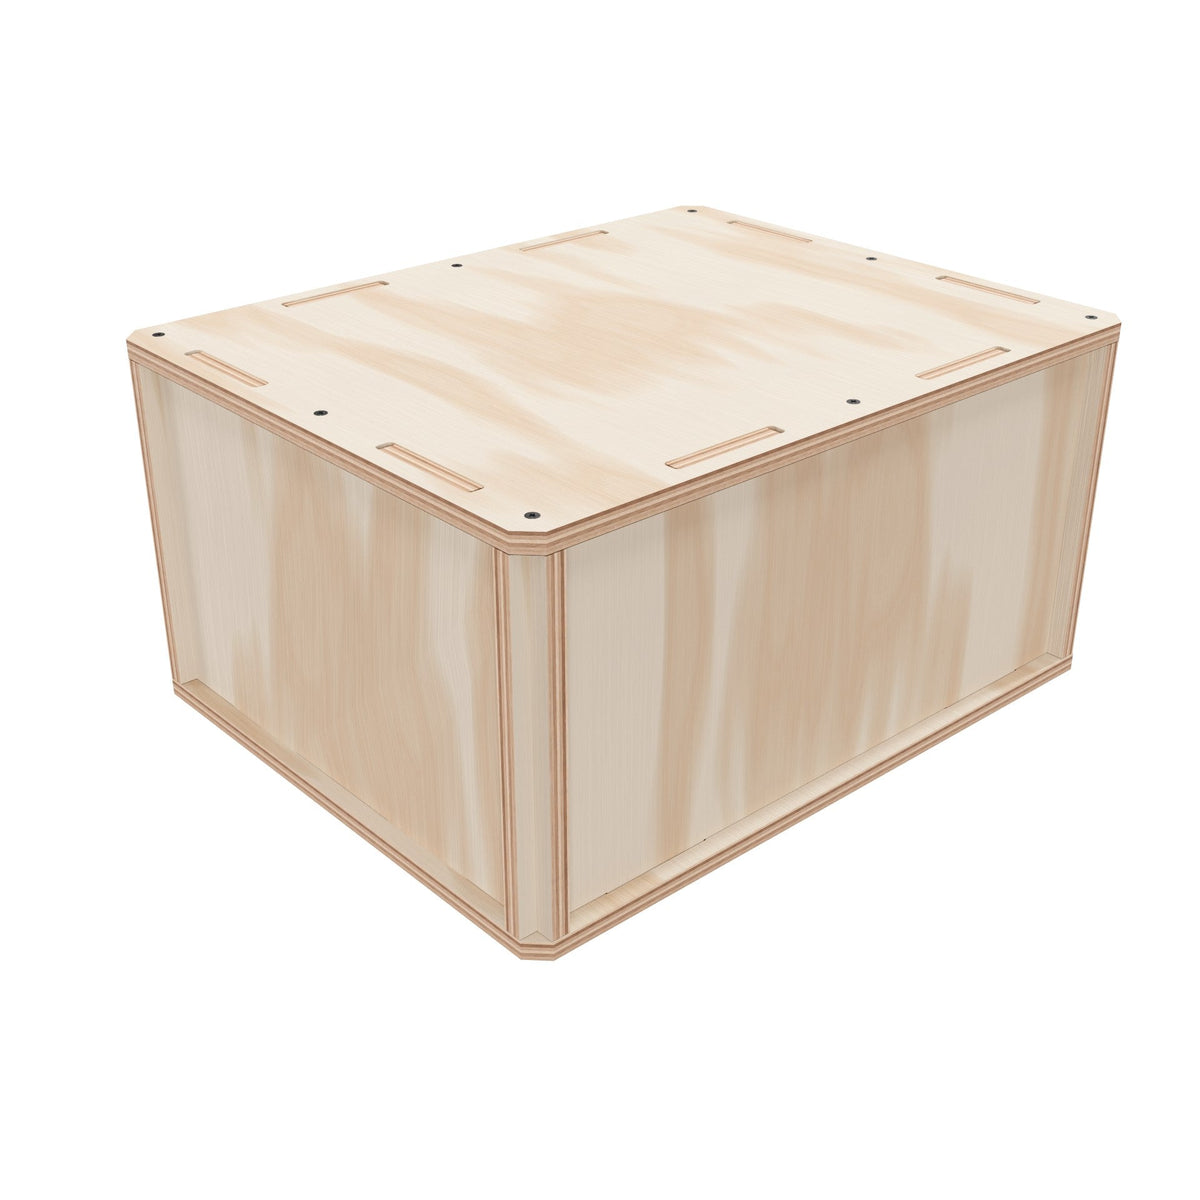 Plywood Shipping Crate 20x16x10